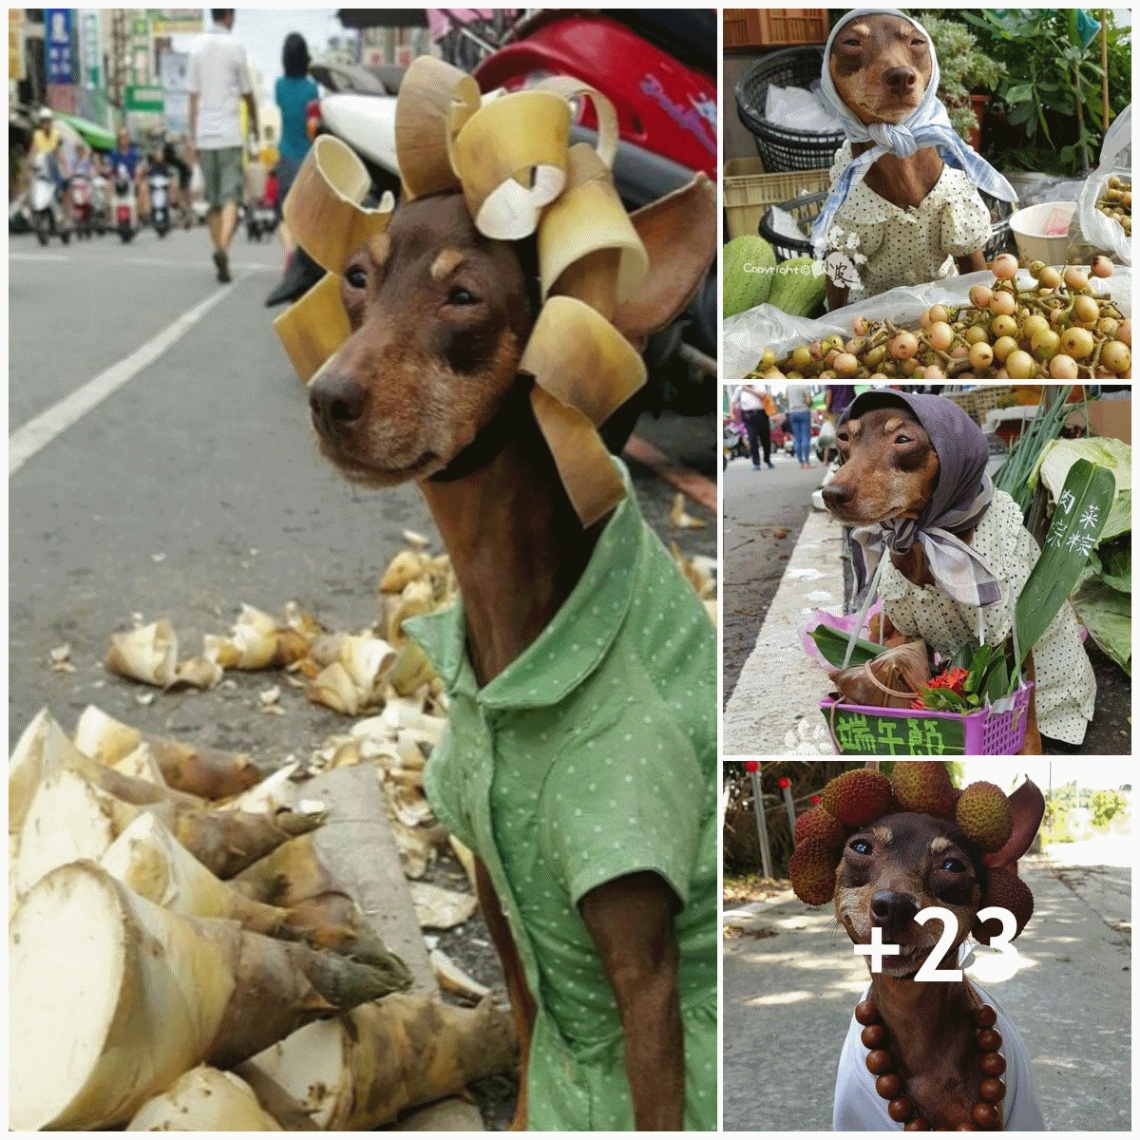 A pampered dog that dines while perched in a market and offers goods to support his owner has become well-known online.